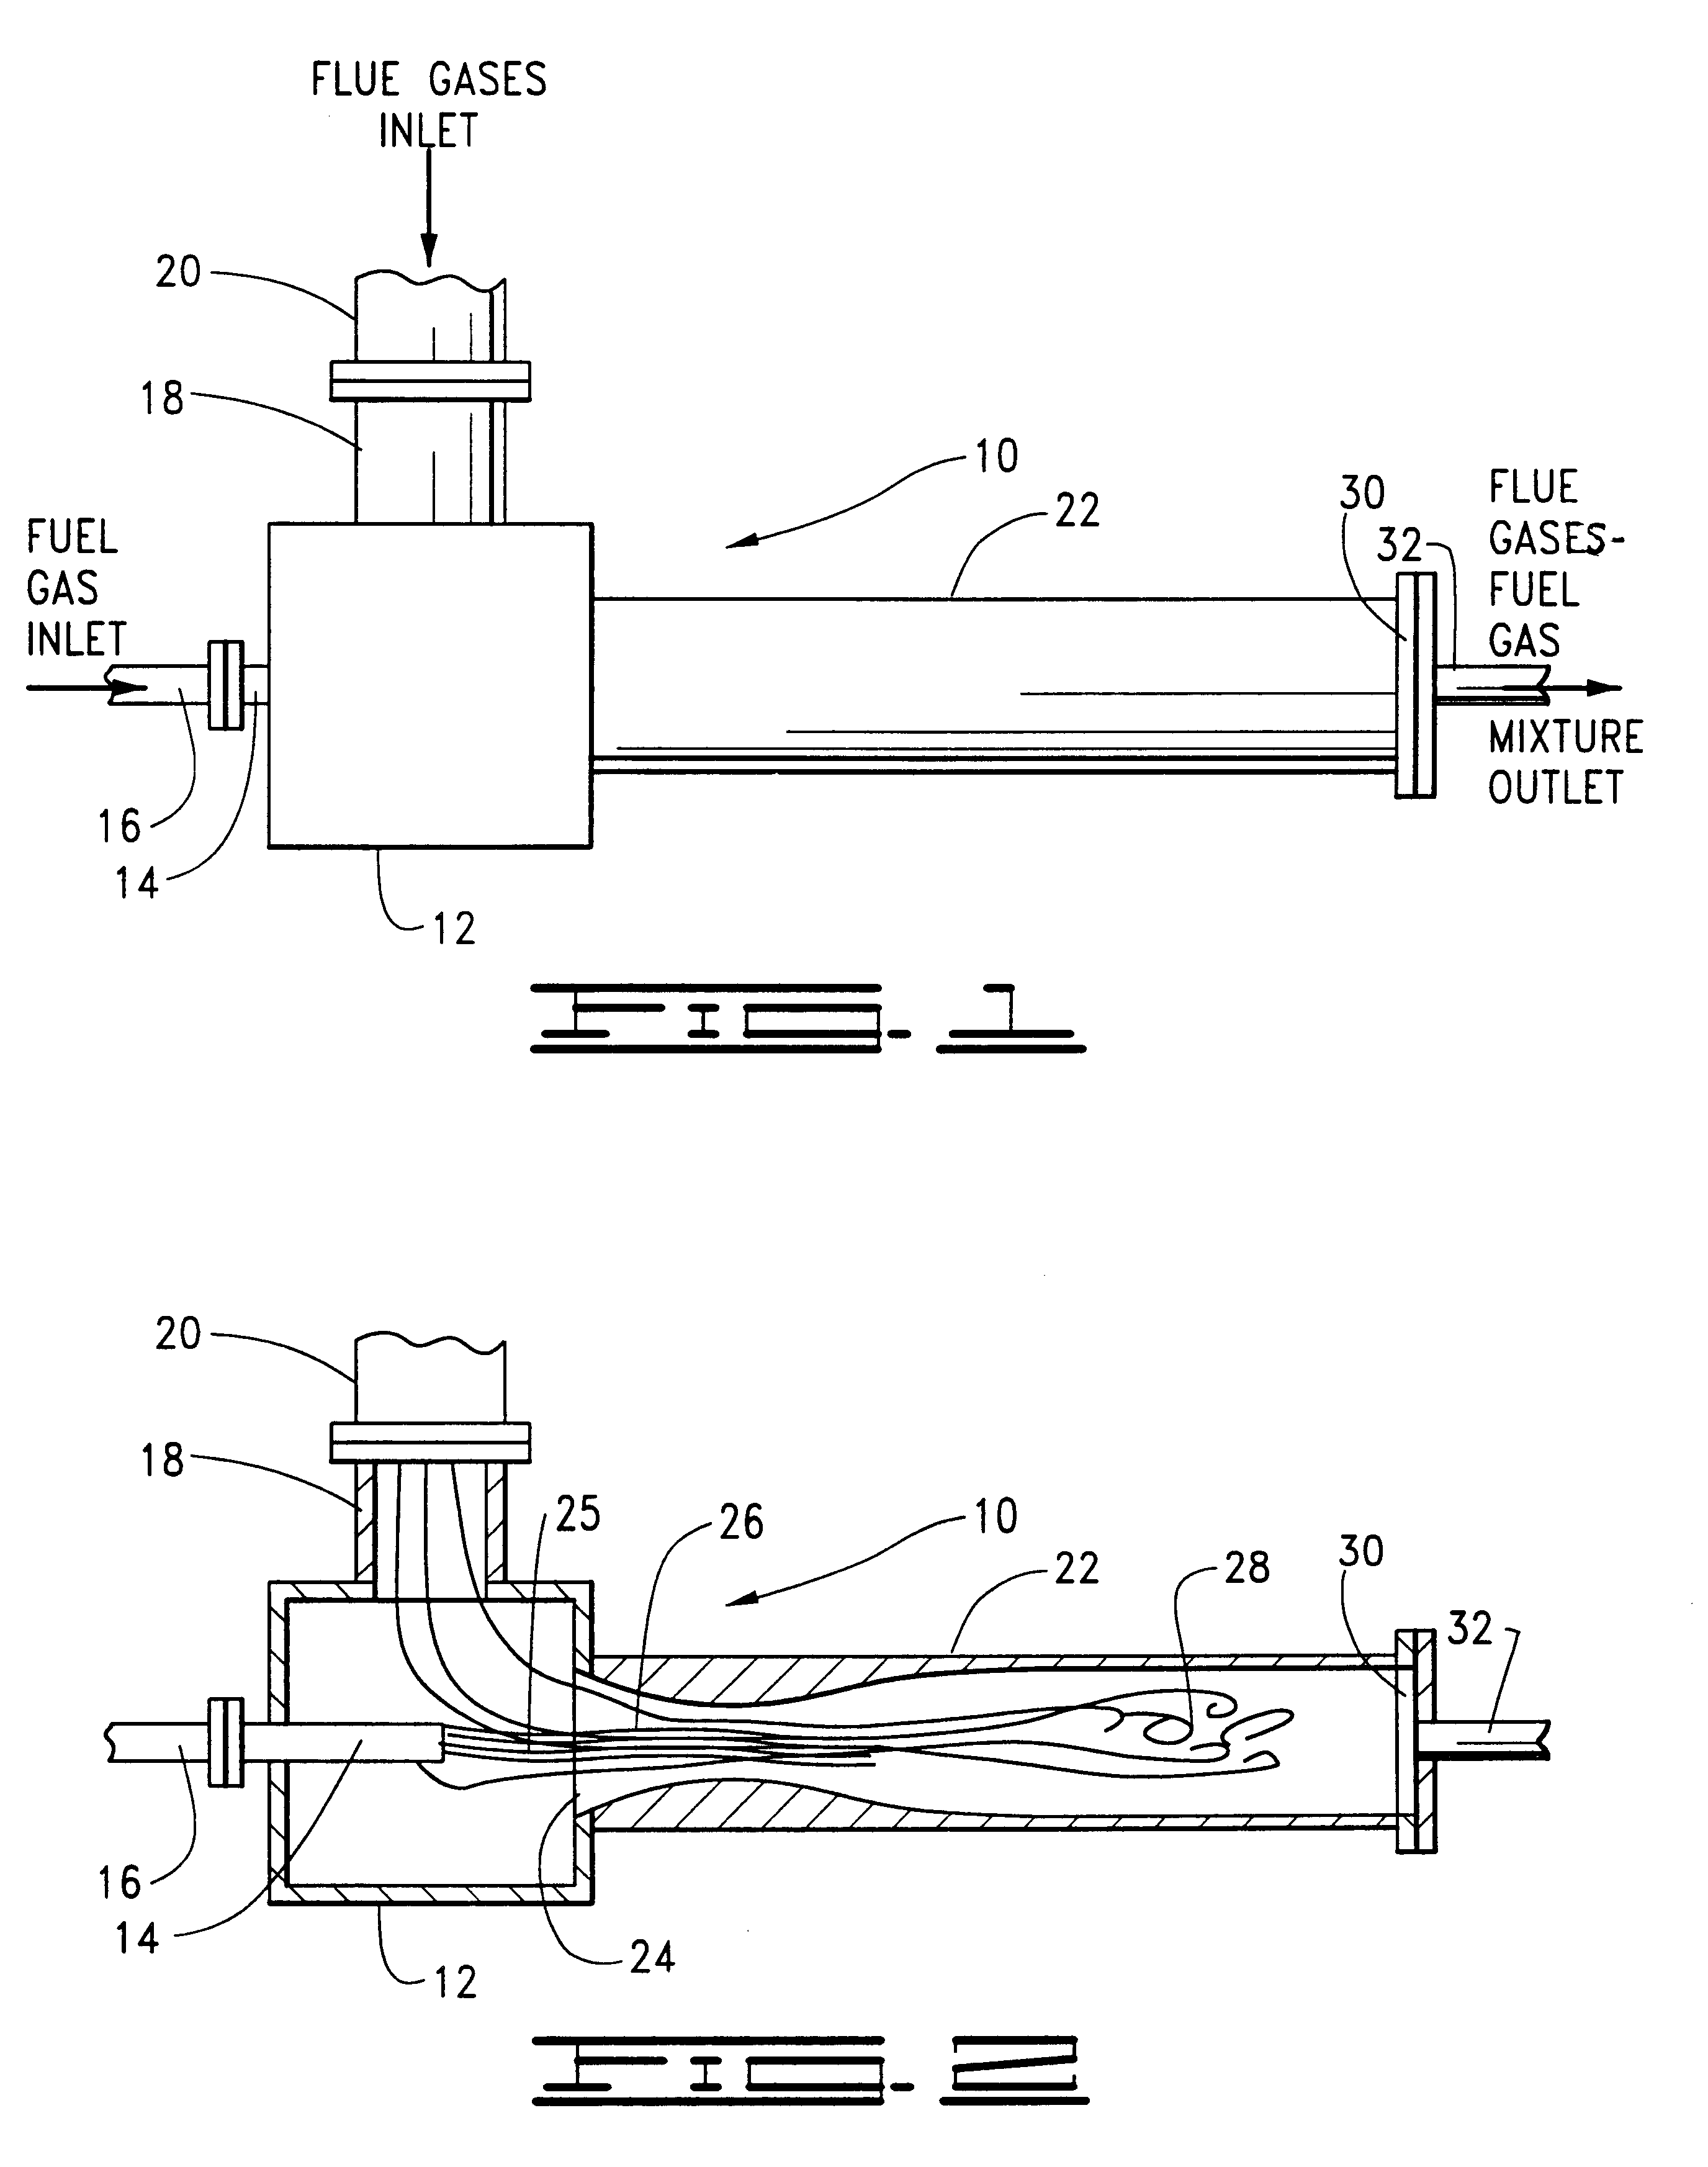 Fuel dilution methods and apparatus for NOx reduction